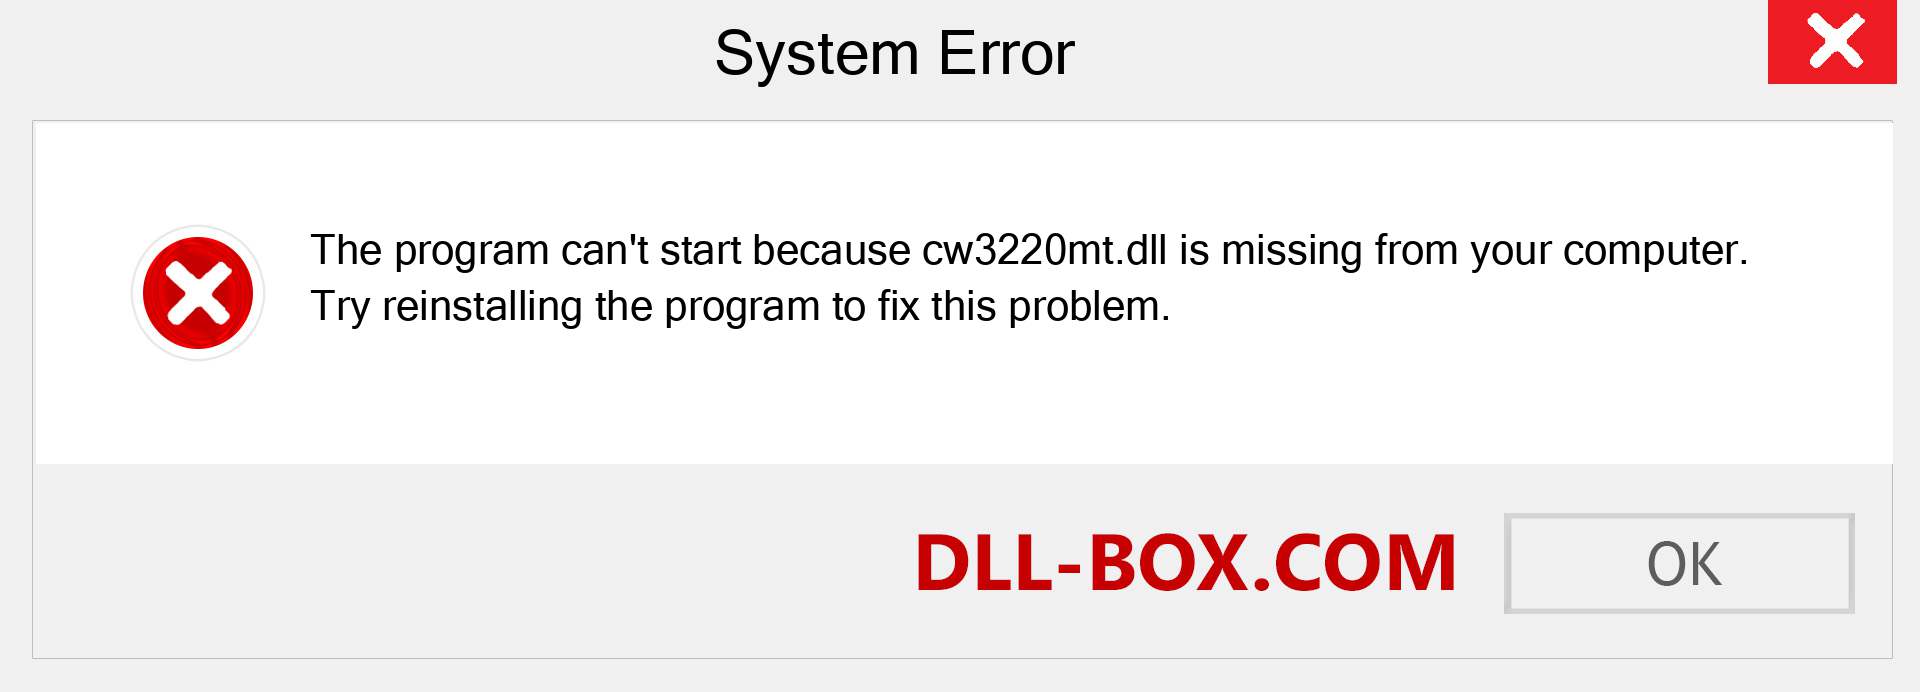  cw3220mt.dll file is missing?. Download for Windows 7, 8, 10 - Fix  cw3220mt dll Missing Error on Windows, photos, images